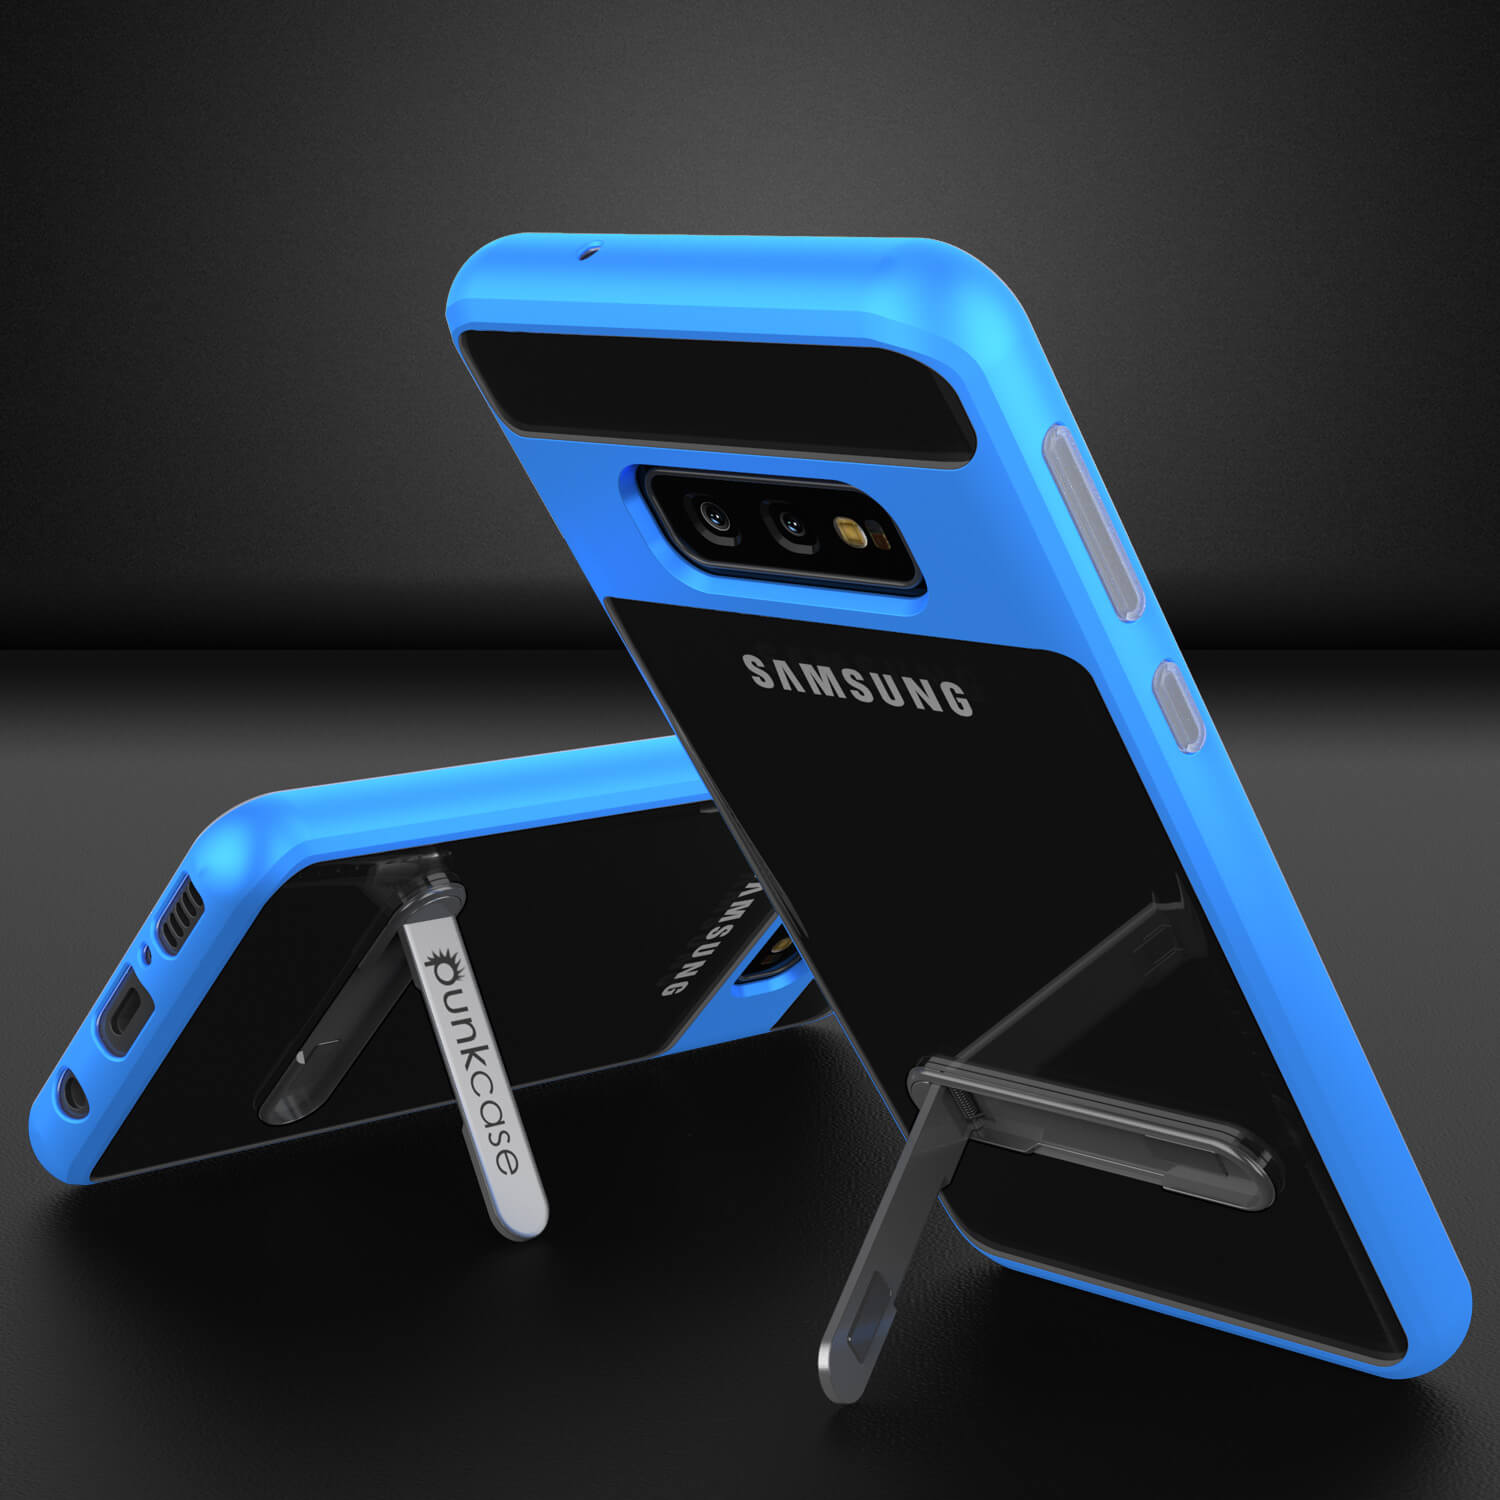 Galaxy S10e Case, PUNKcase [LUCID 3.0 Series] [Slim Fit] Armor Cover w/ Integrated Screen Protector [Blue]